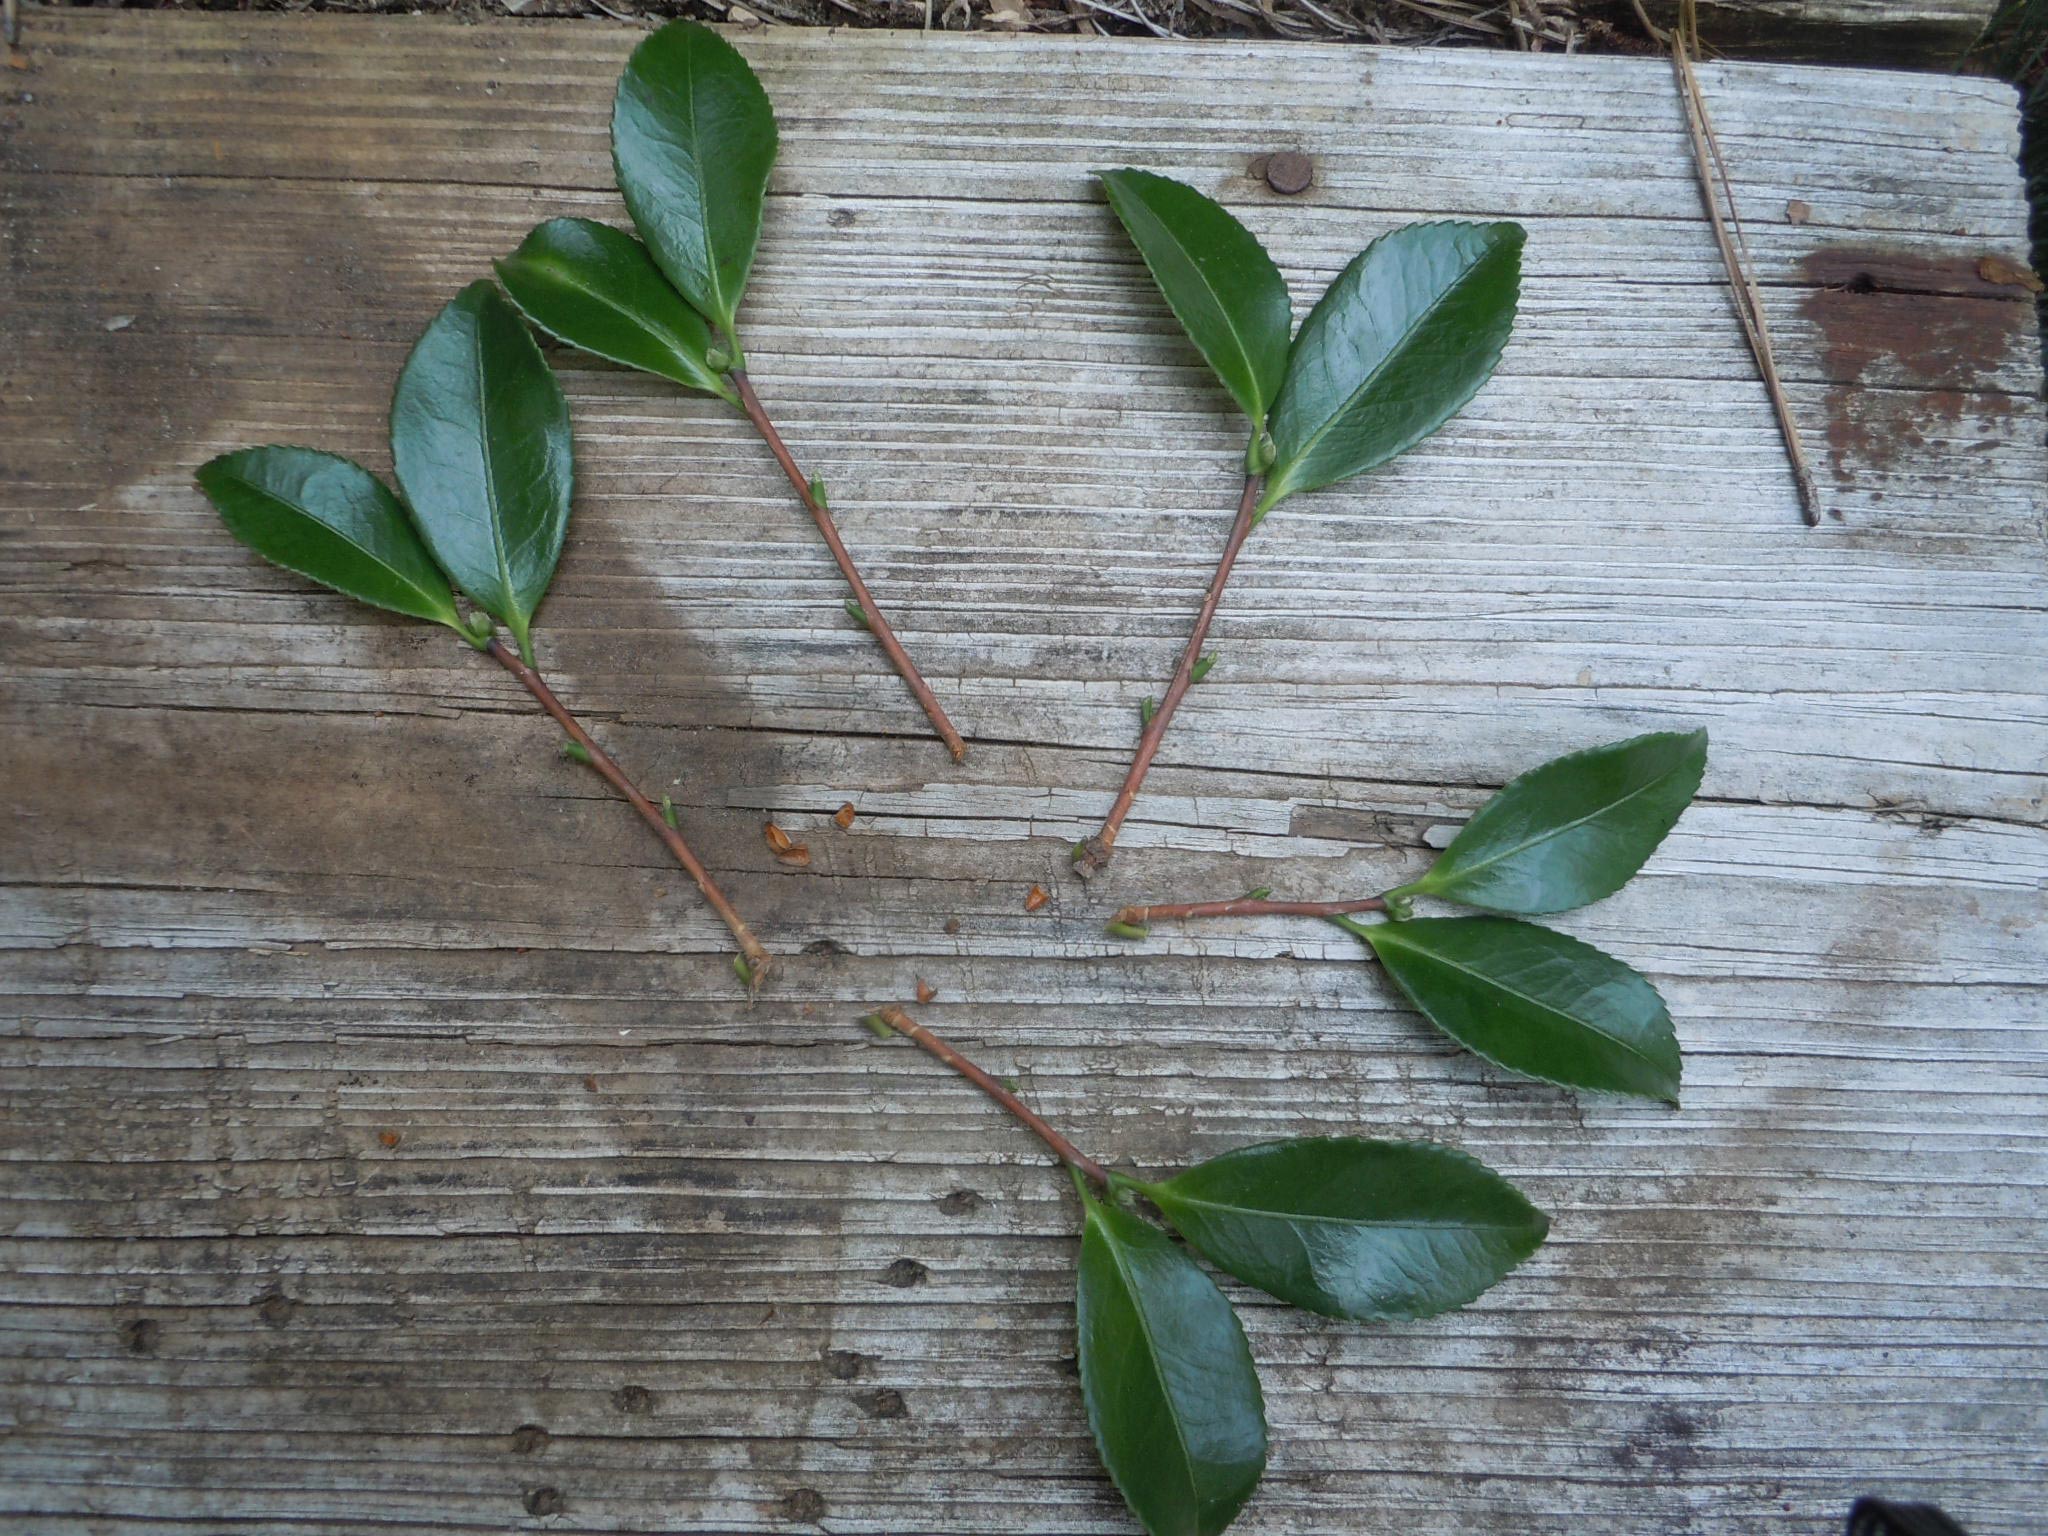 remove lower leaves, leaving only two at the tip